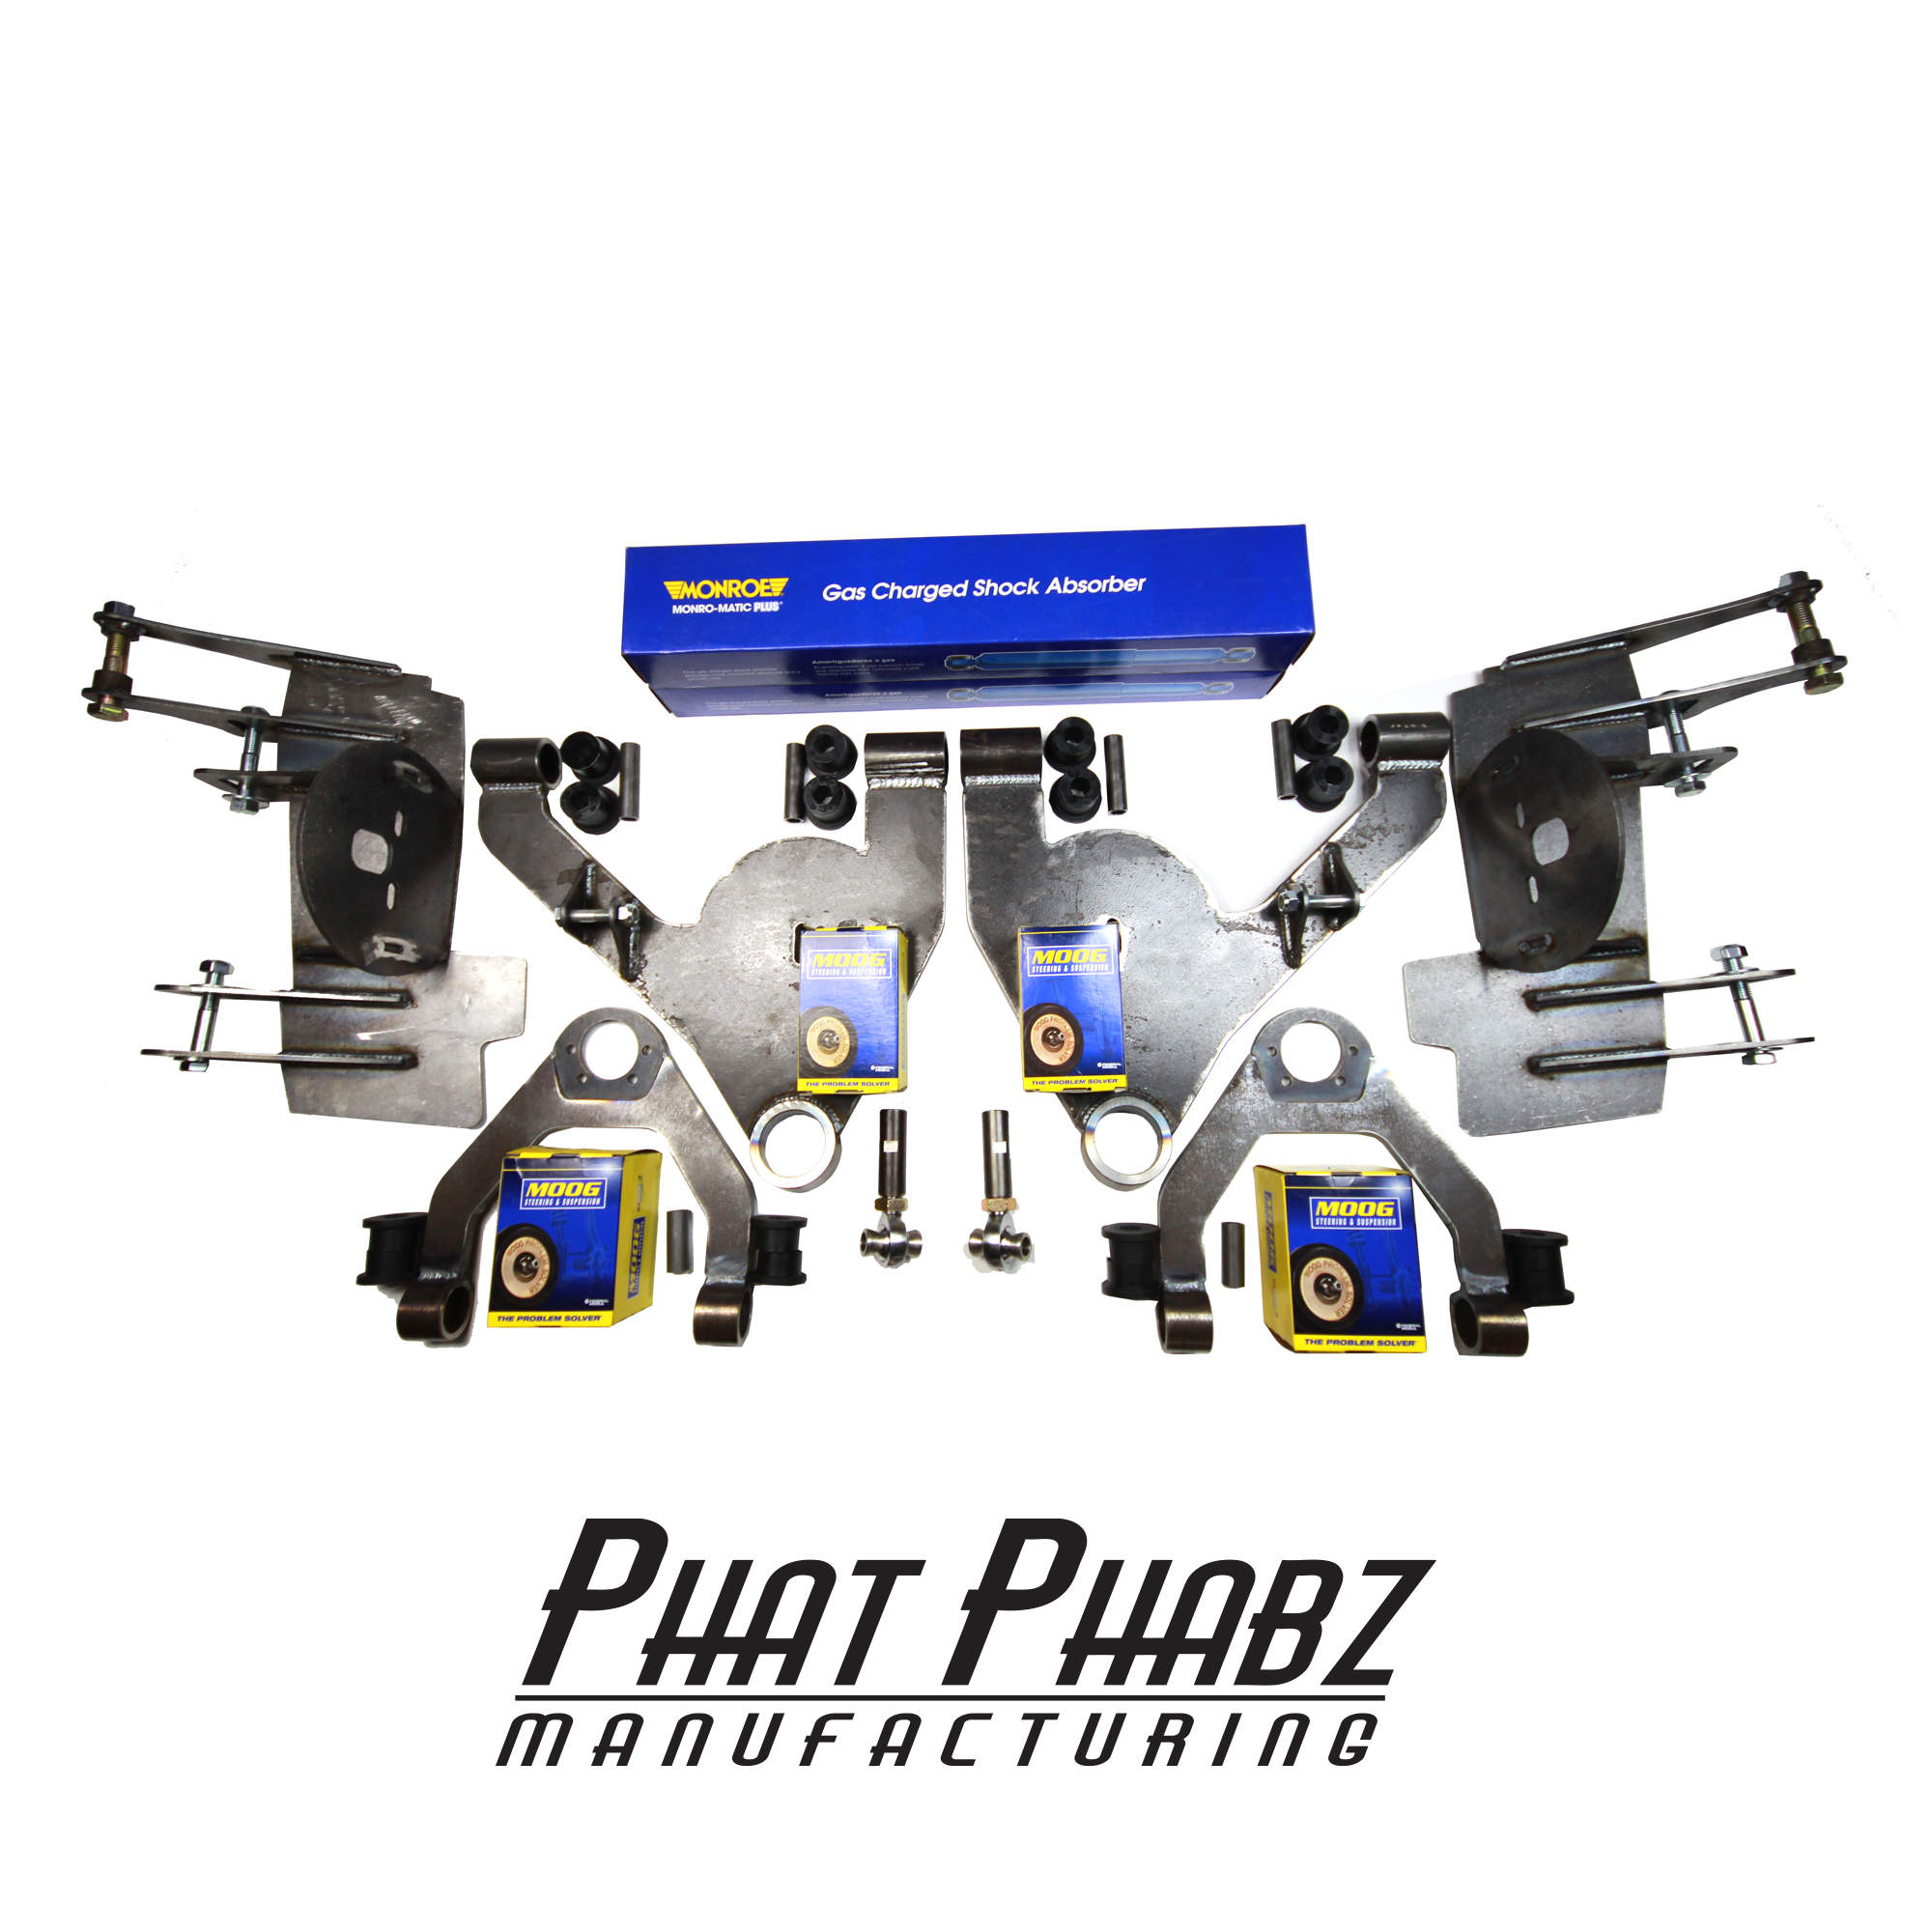 PHA 1001 Phat Phabz 99'- 06' Silverao/Sierra Front Kit Features a 1" narrowed Track Width, Moog Ball Joints, Monroe Shocks, W/ Steering Kit with 3/4" chromoly heims ** Will lay 22"-28" wheels ** ** Price includes $100 spindle core charge **